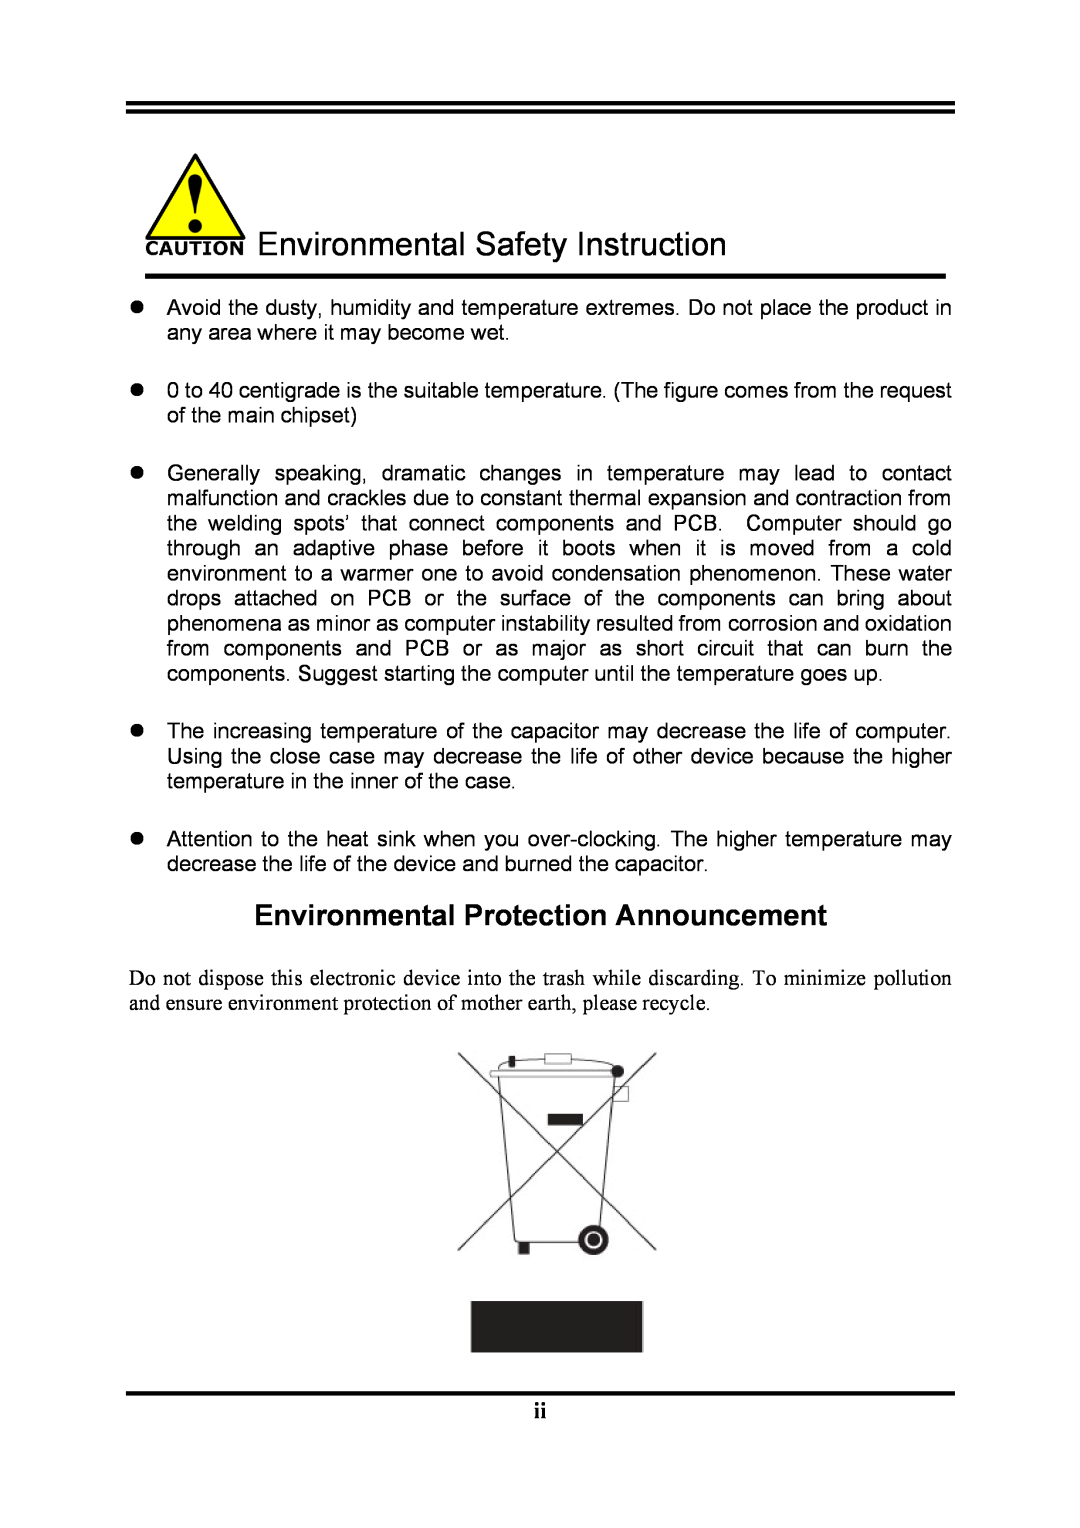 AMD KM780V user manual Environmental Protection Announcement, Environmental Safety Instruction 